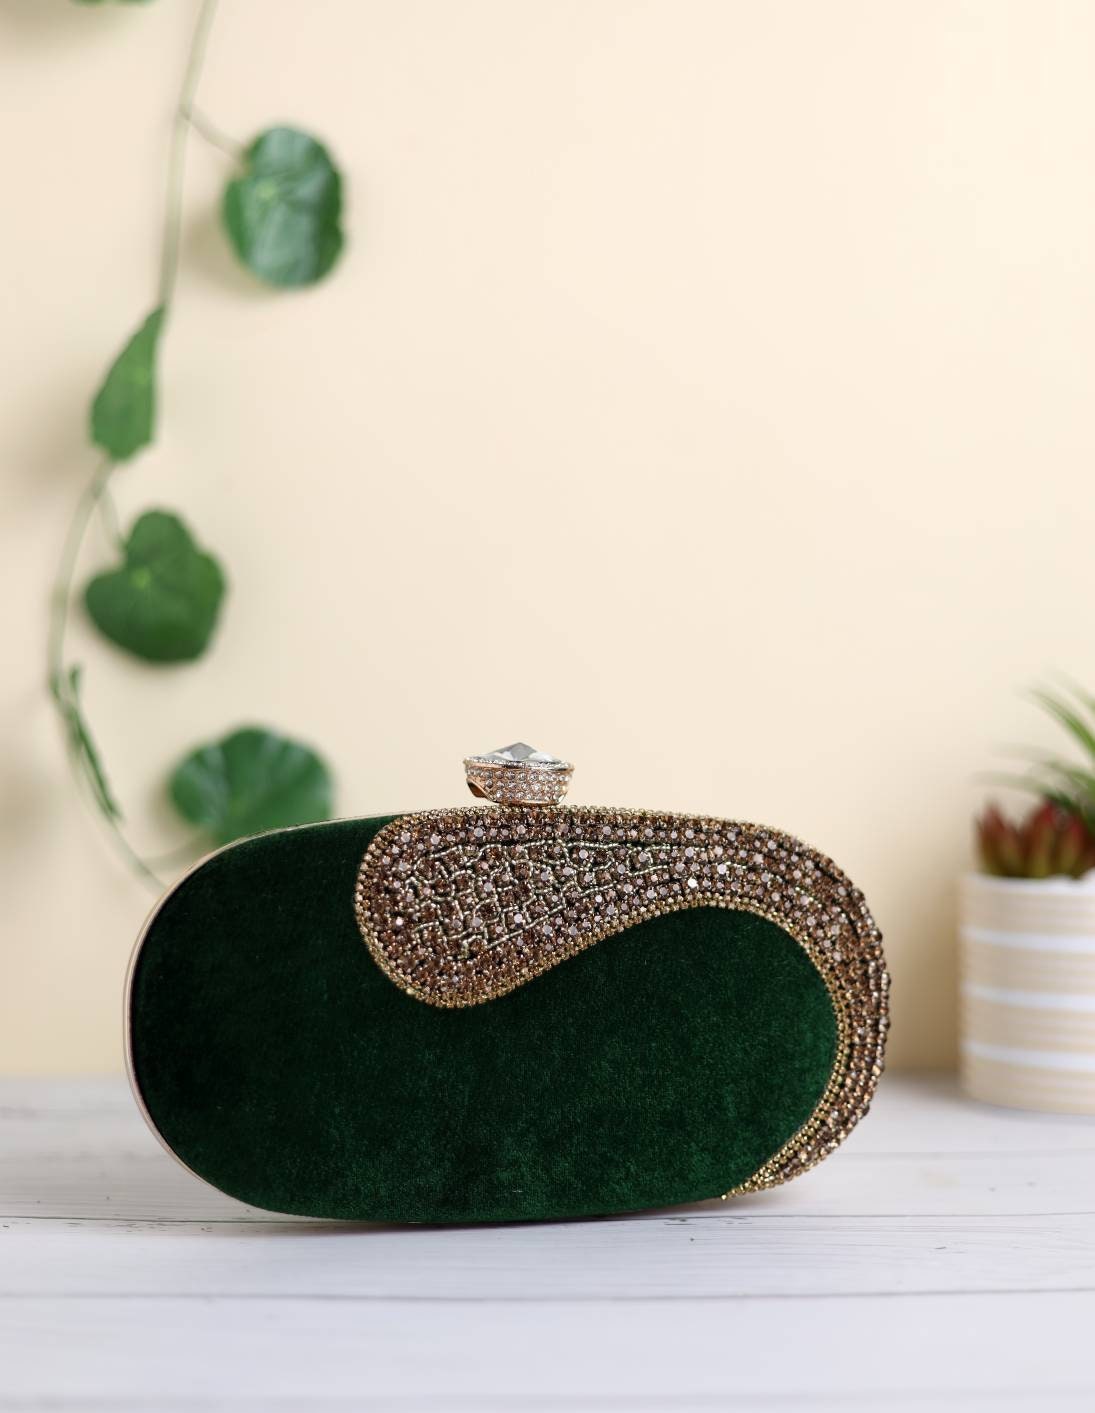 Velvet Emerald Green Clutch Purse Bag Embroidered With Faux 